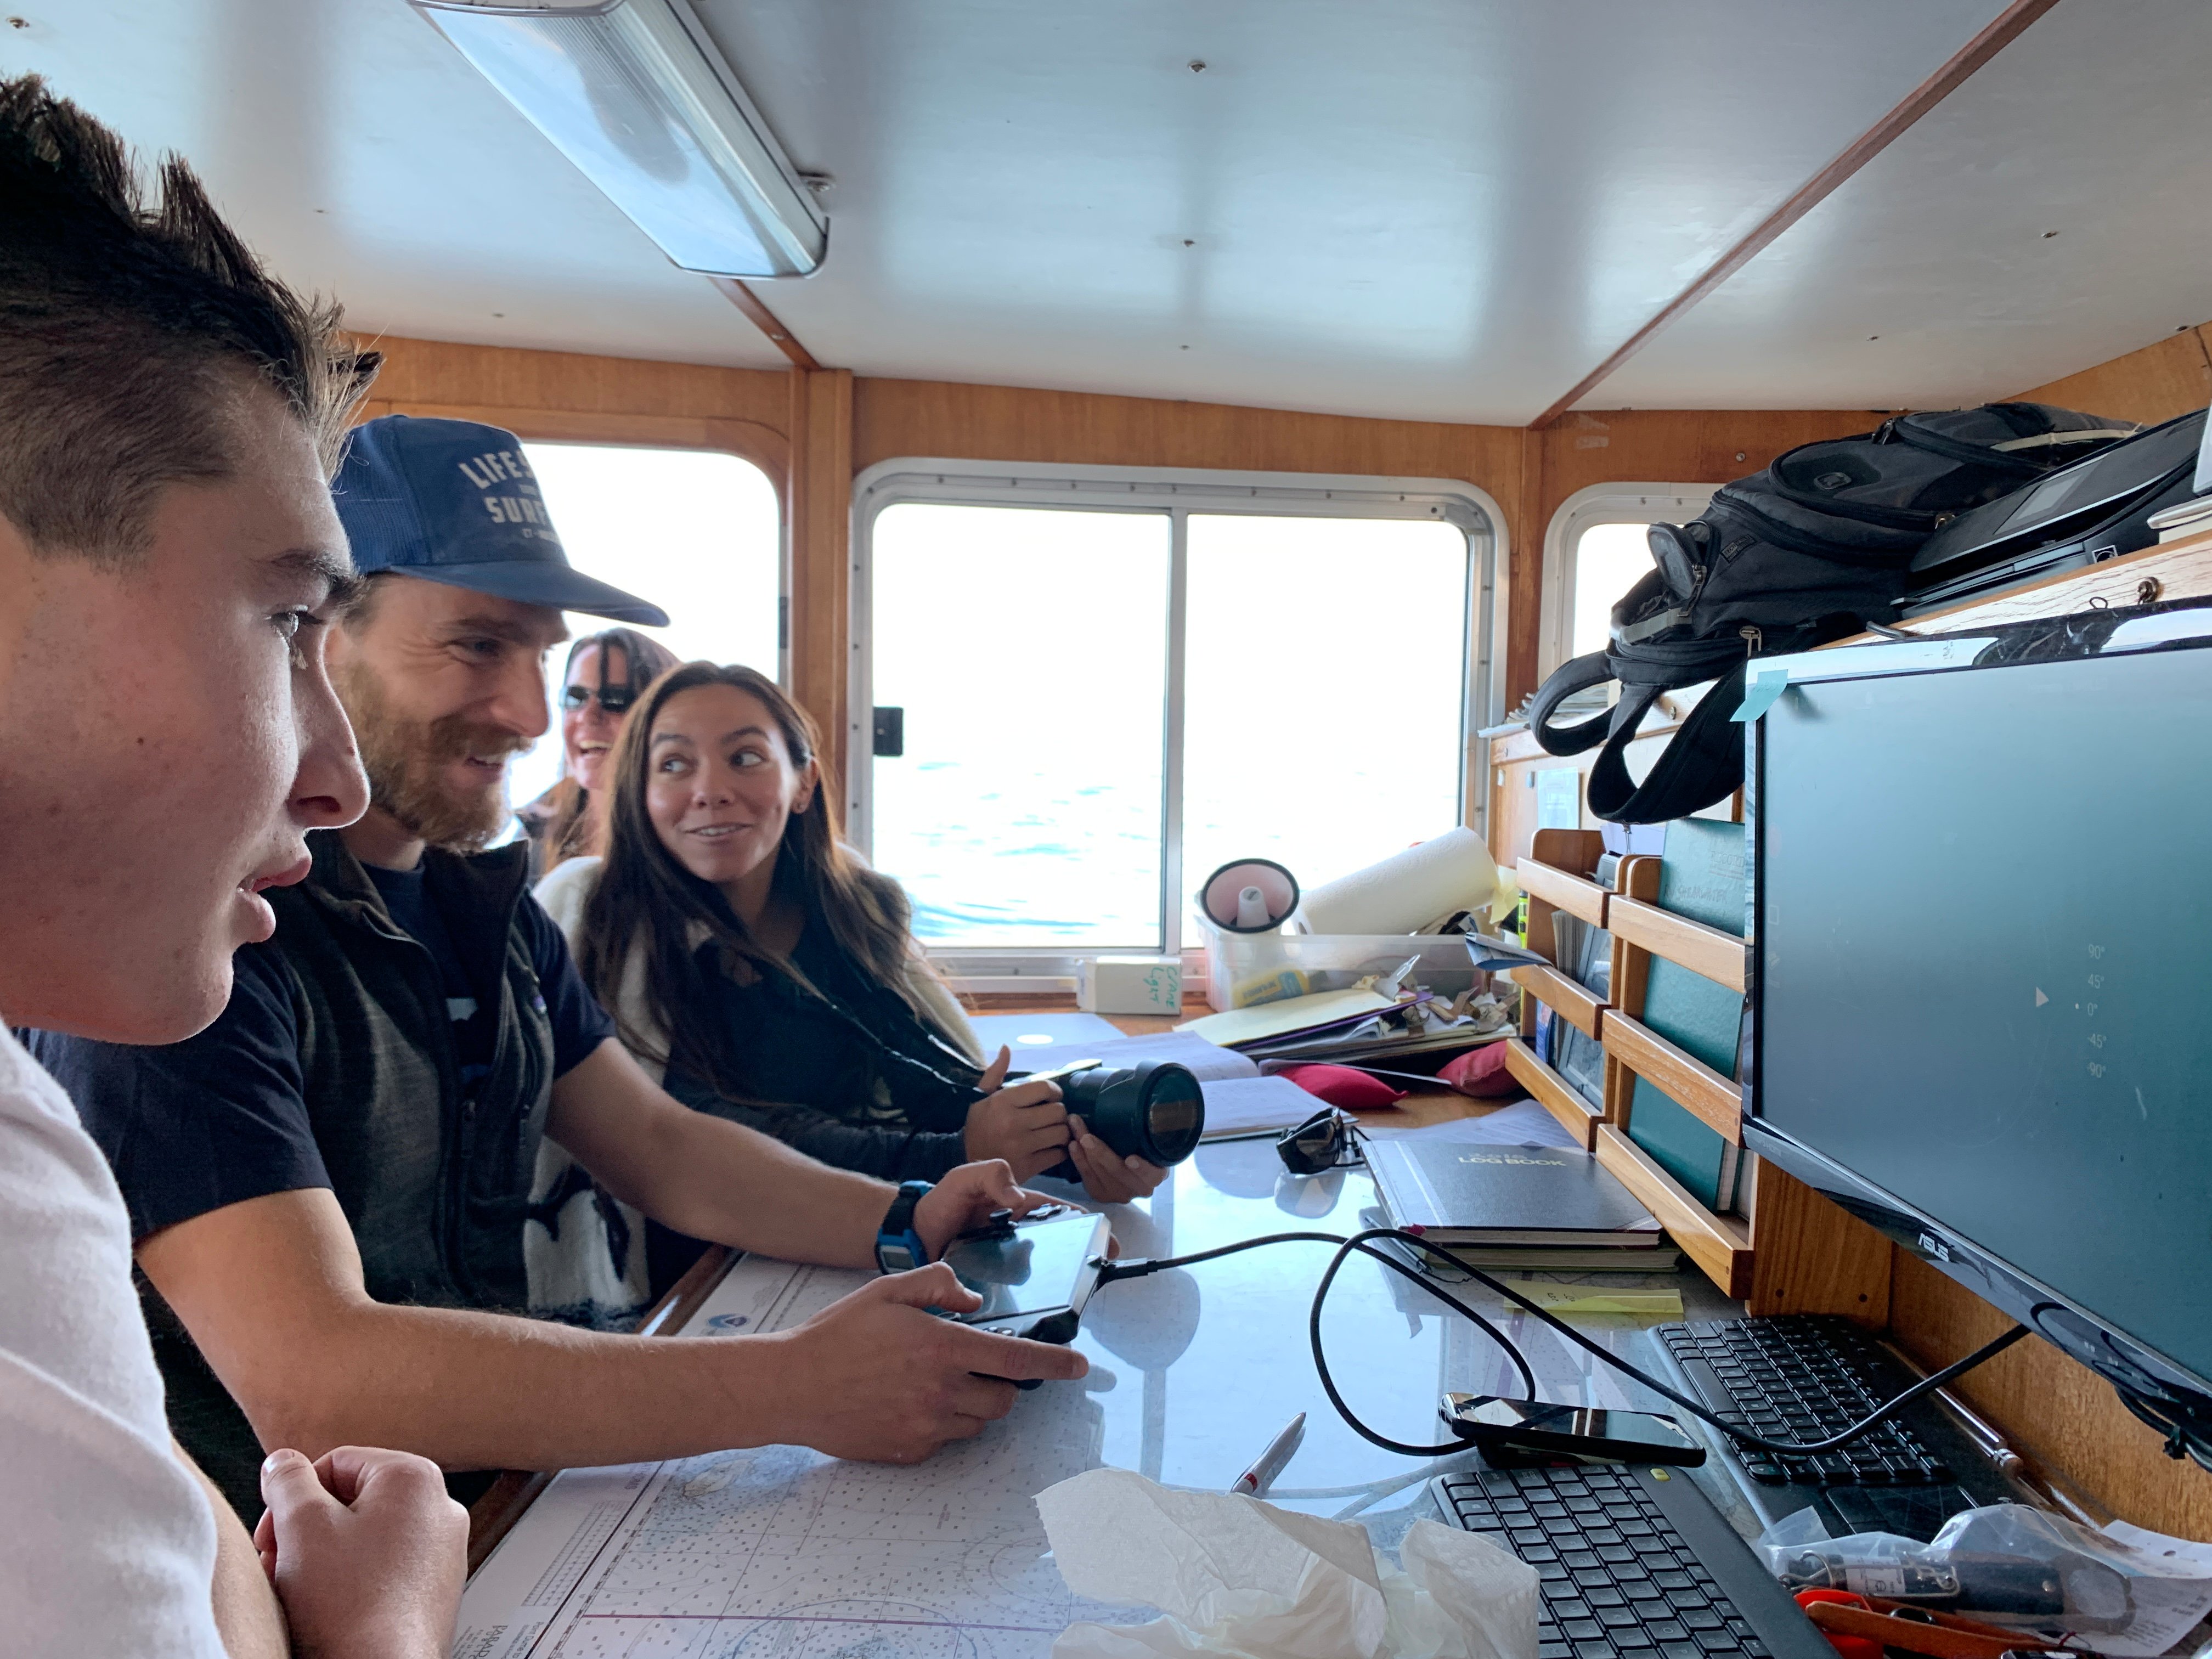 California Sea Grant state fellow Pike Spector demonstrates the nuances of piloting a Trident from the wheelhouse of r/v Shearwater. Students were able to see the pilot’s view of the ROV on a computer monitor mounted in the wheelhouse. Photo credit: Dr. Peavey-Reeves